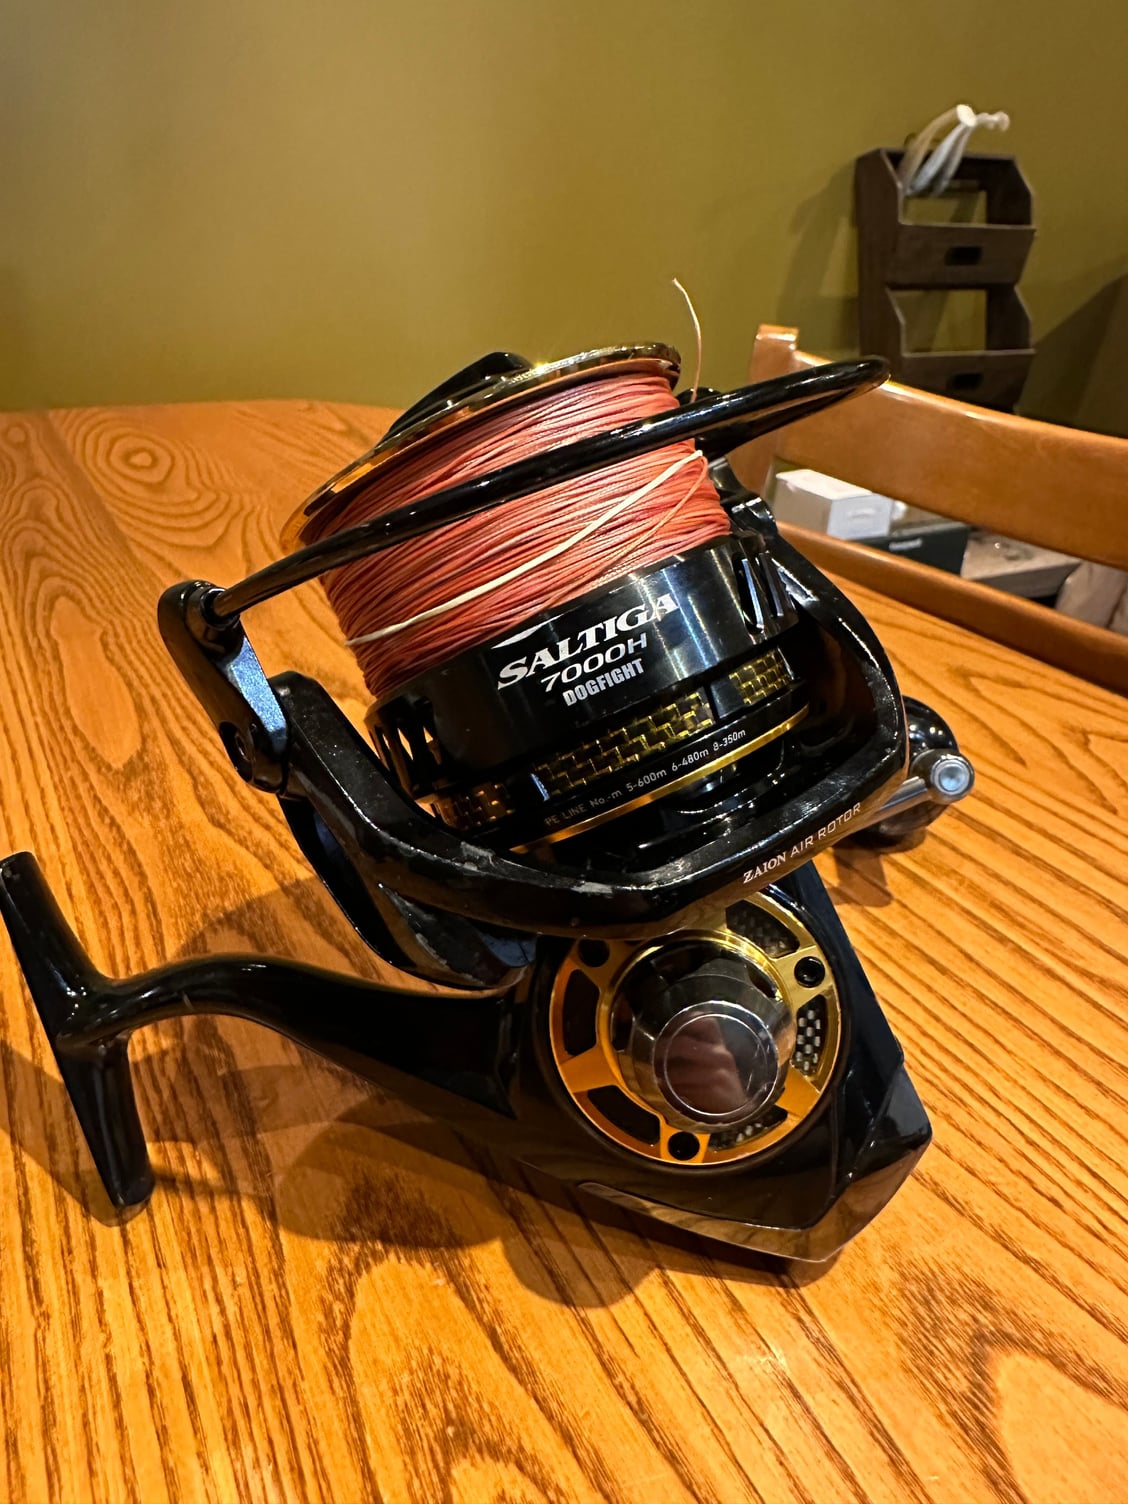 Daiwa saltiga dogfight 7000h just serviced - The Hull Truth - Boating and Fishing  Forum